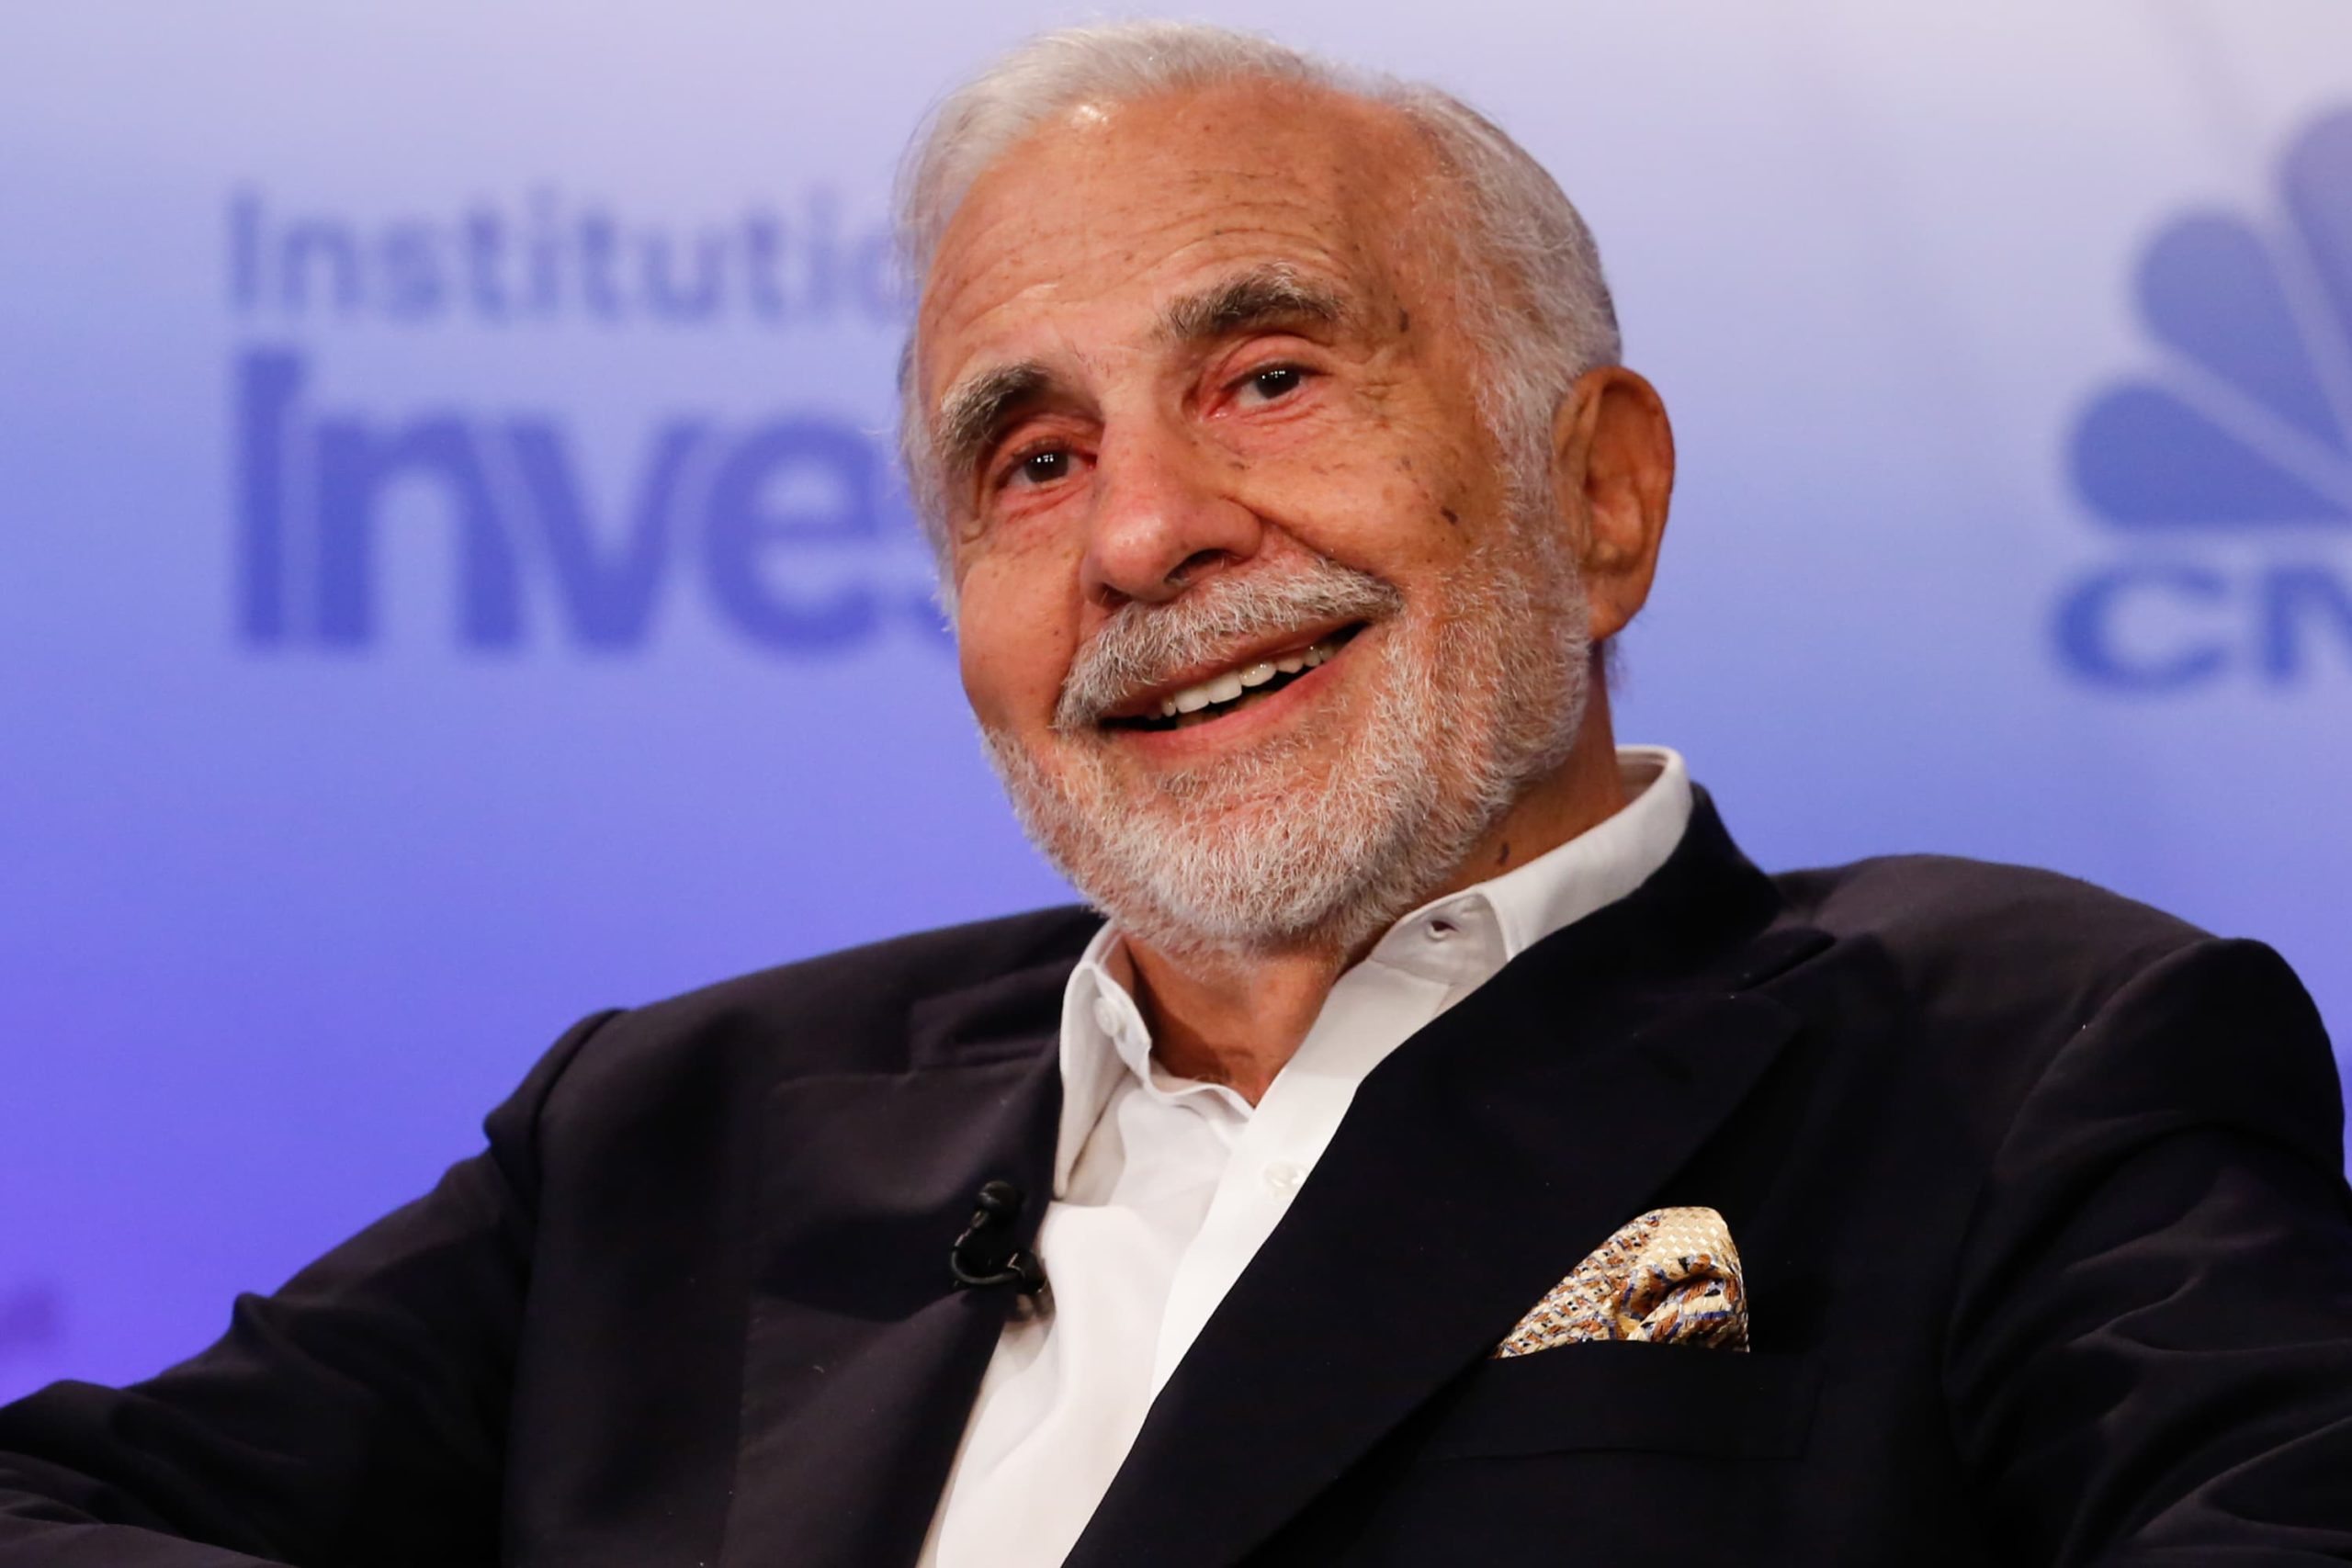 Carl Icahn owns 4% stake in International Flavors & Fragrances, sources say